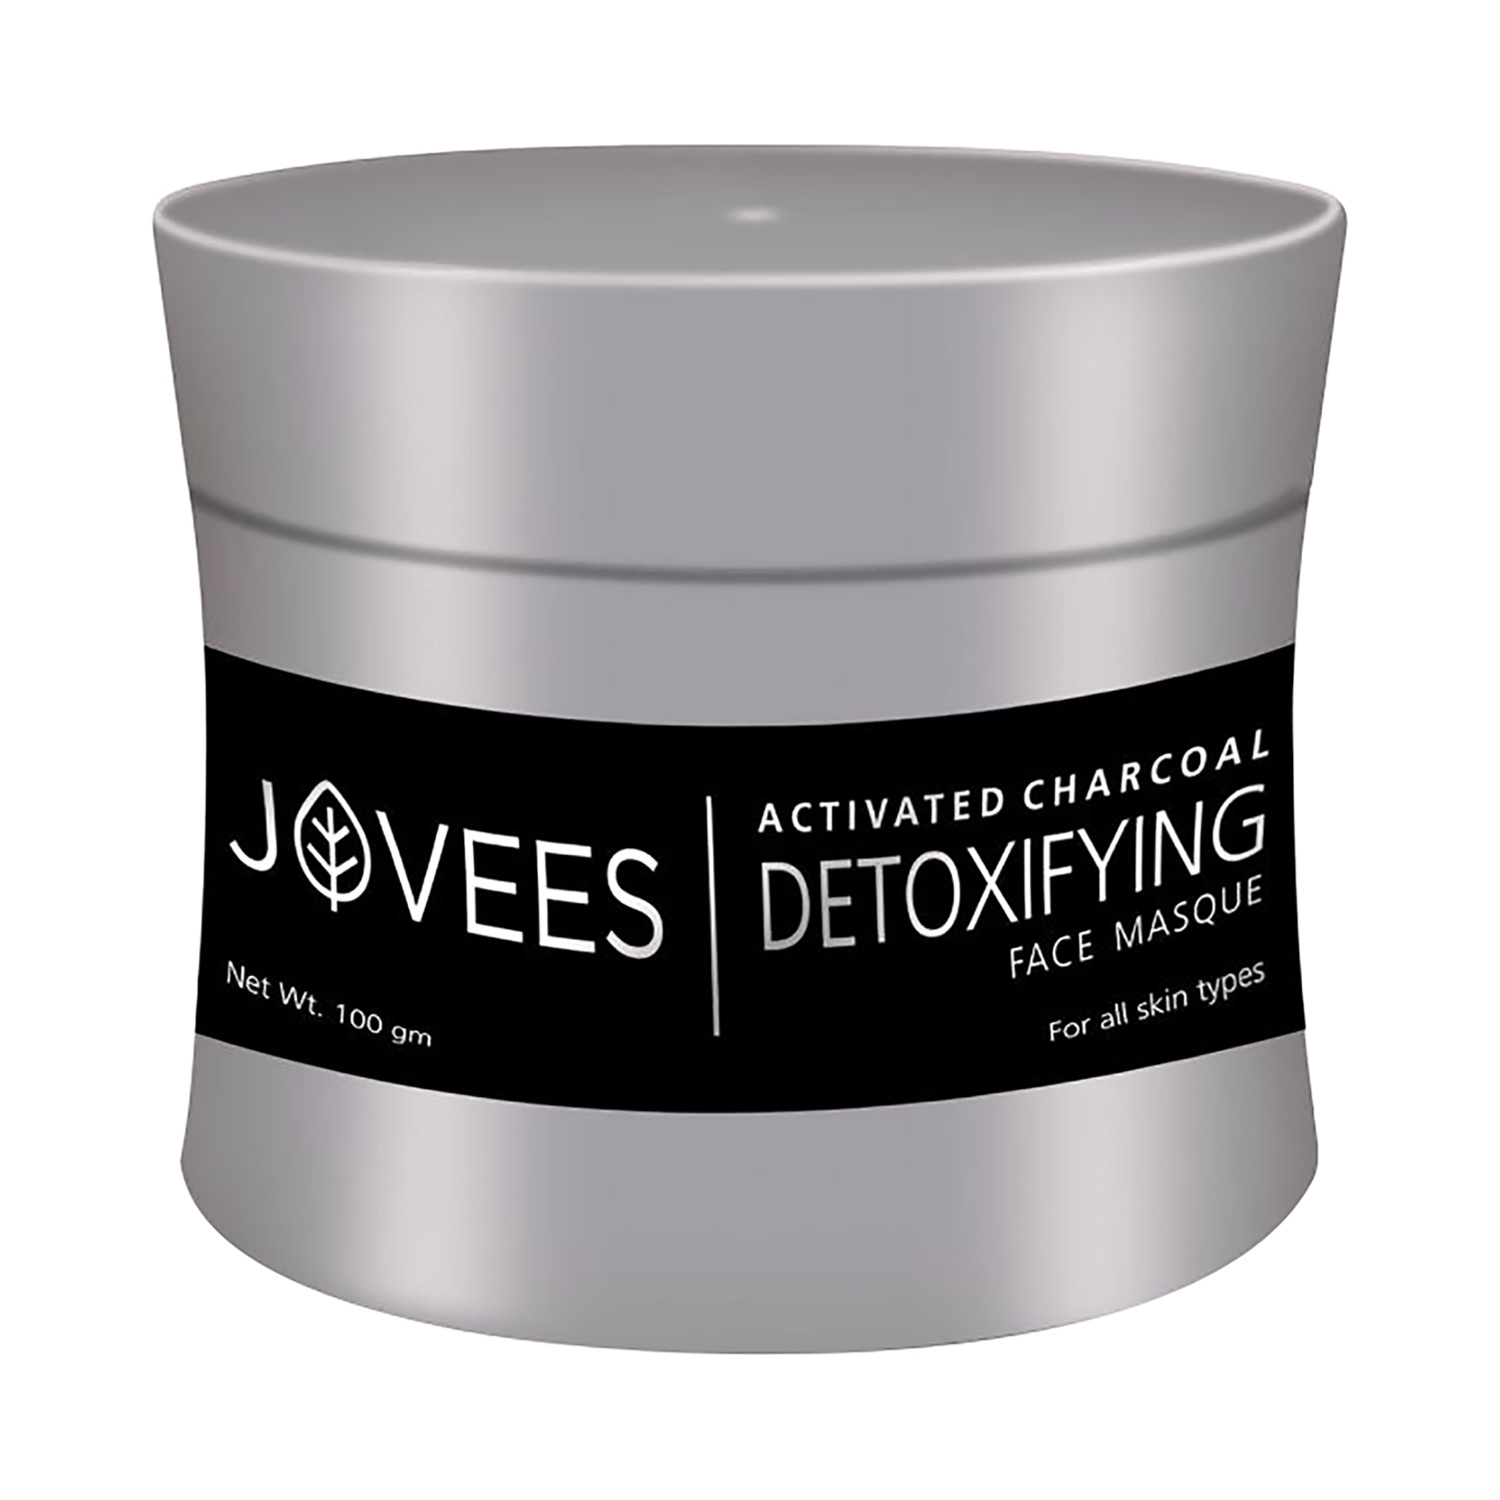 Jovees Activated Charcoal Detoxifying Face Masque (100g)